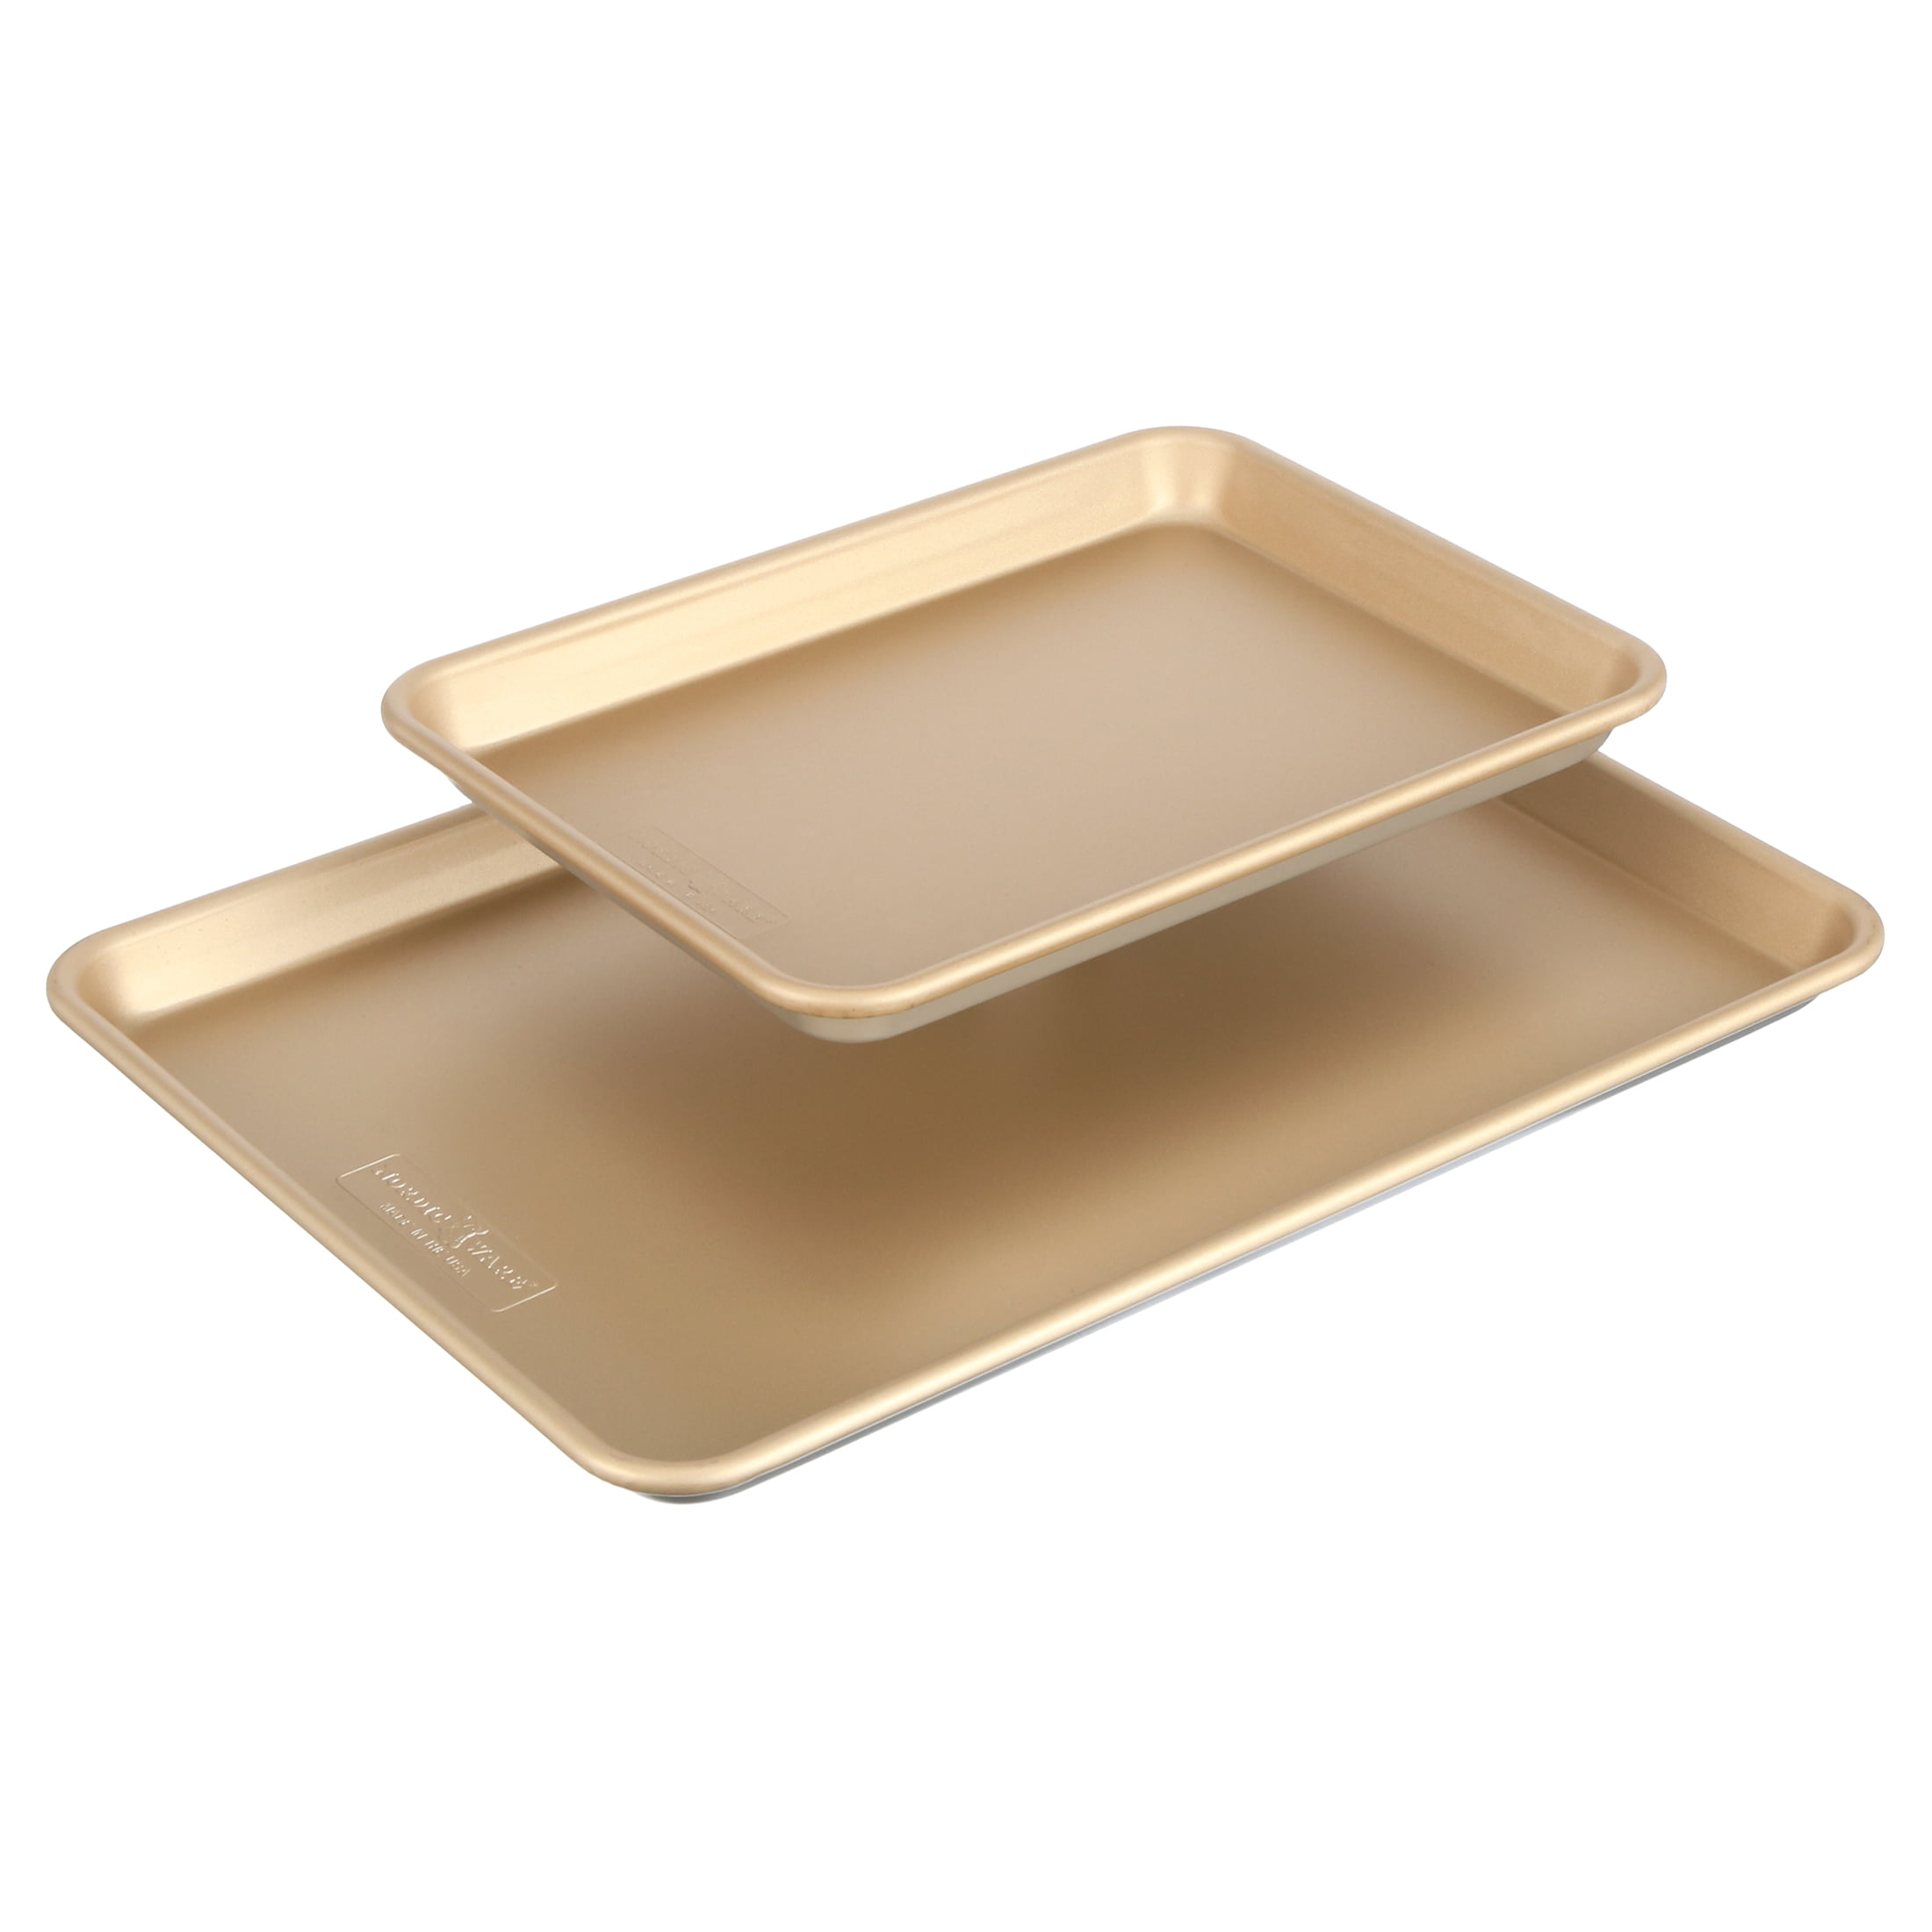 Gourmet Edge - 2 Pc Nonstick Baking Sheets-#1001W1002 – Womynhomeproducts